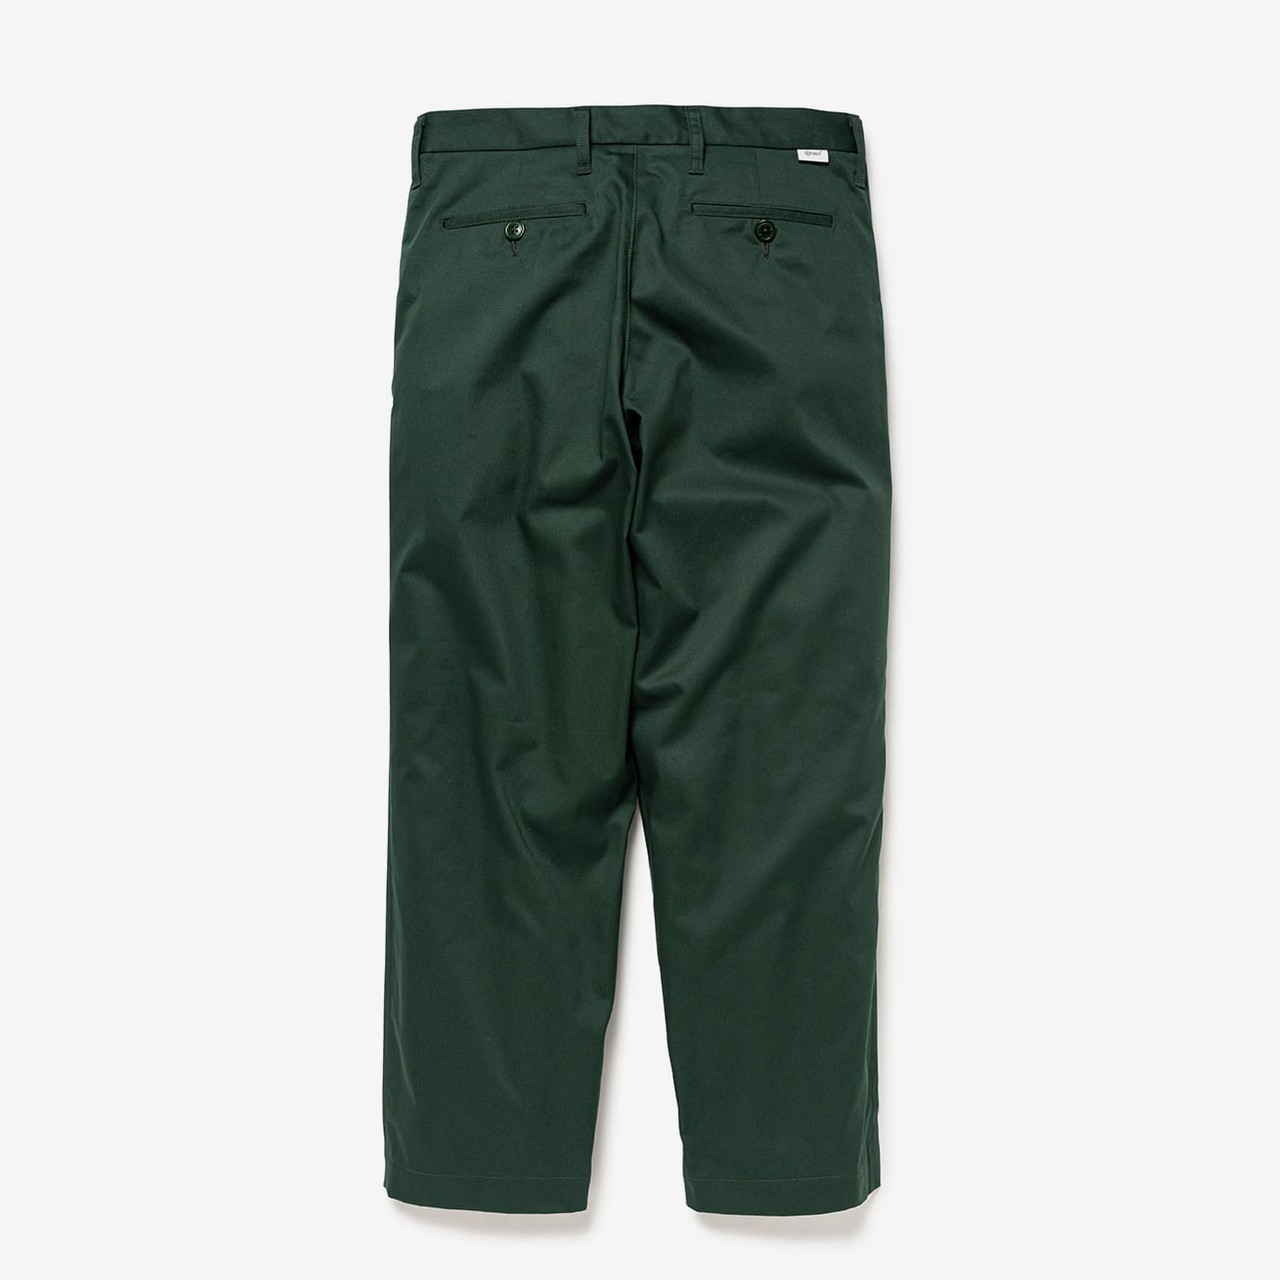 WTAPS Trousers WRKT2001 / TROUSERS / CTPL. TWILL